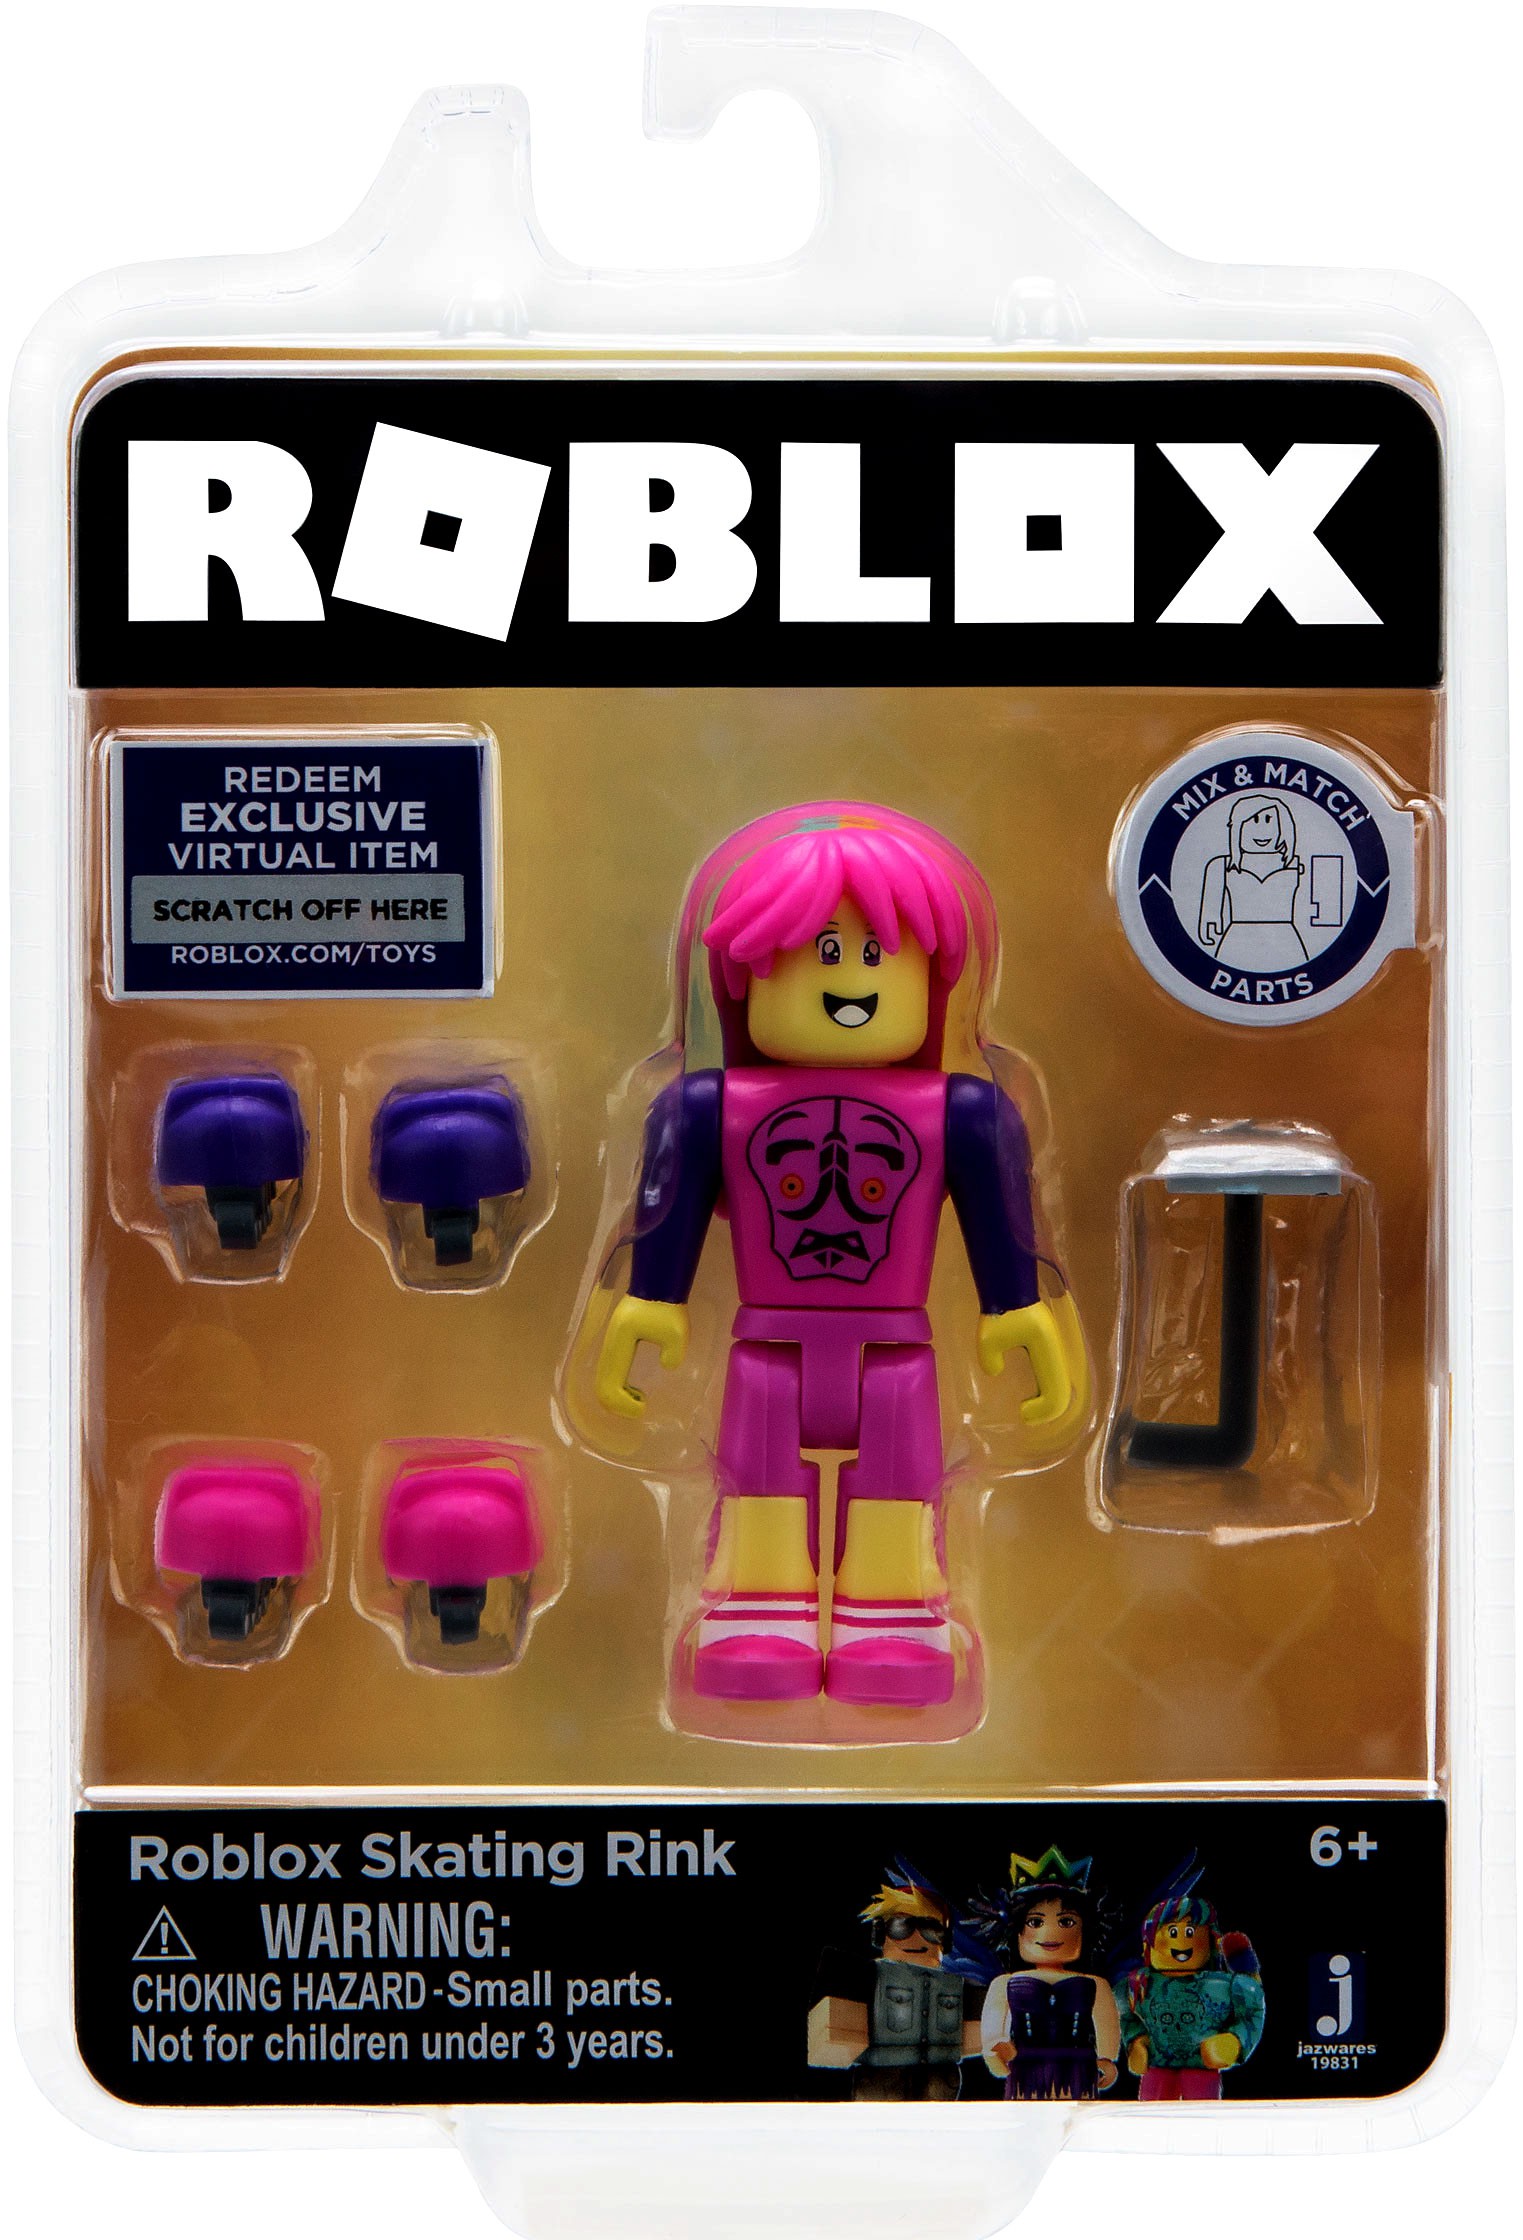 Celebrity Collection Roblox Skating Rink Action Figure 681326198314 Ebay - tv movie video games roblox skating rink action figure